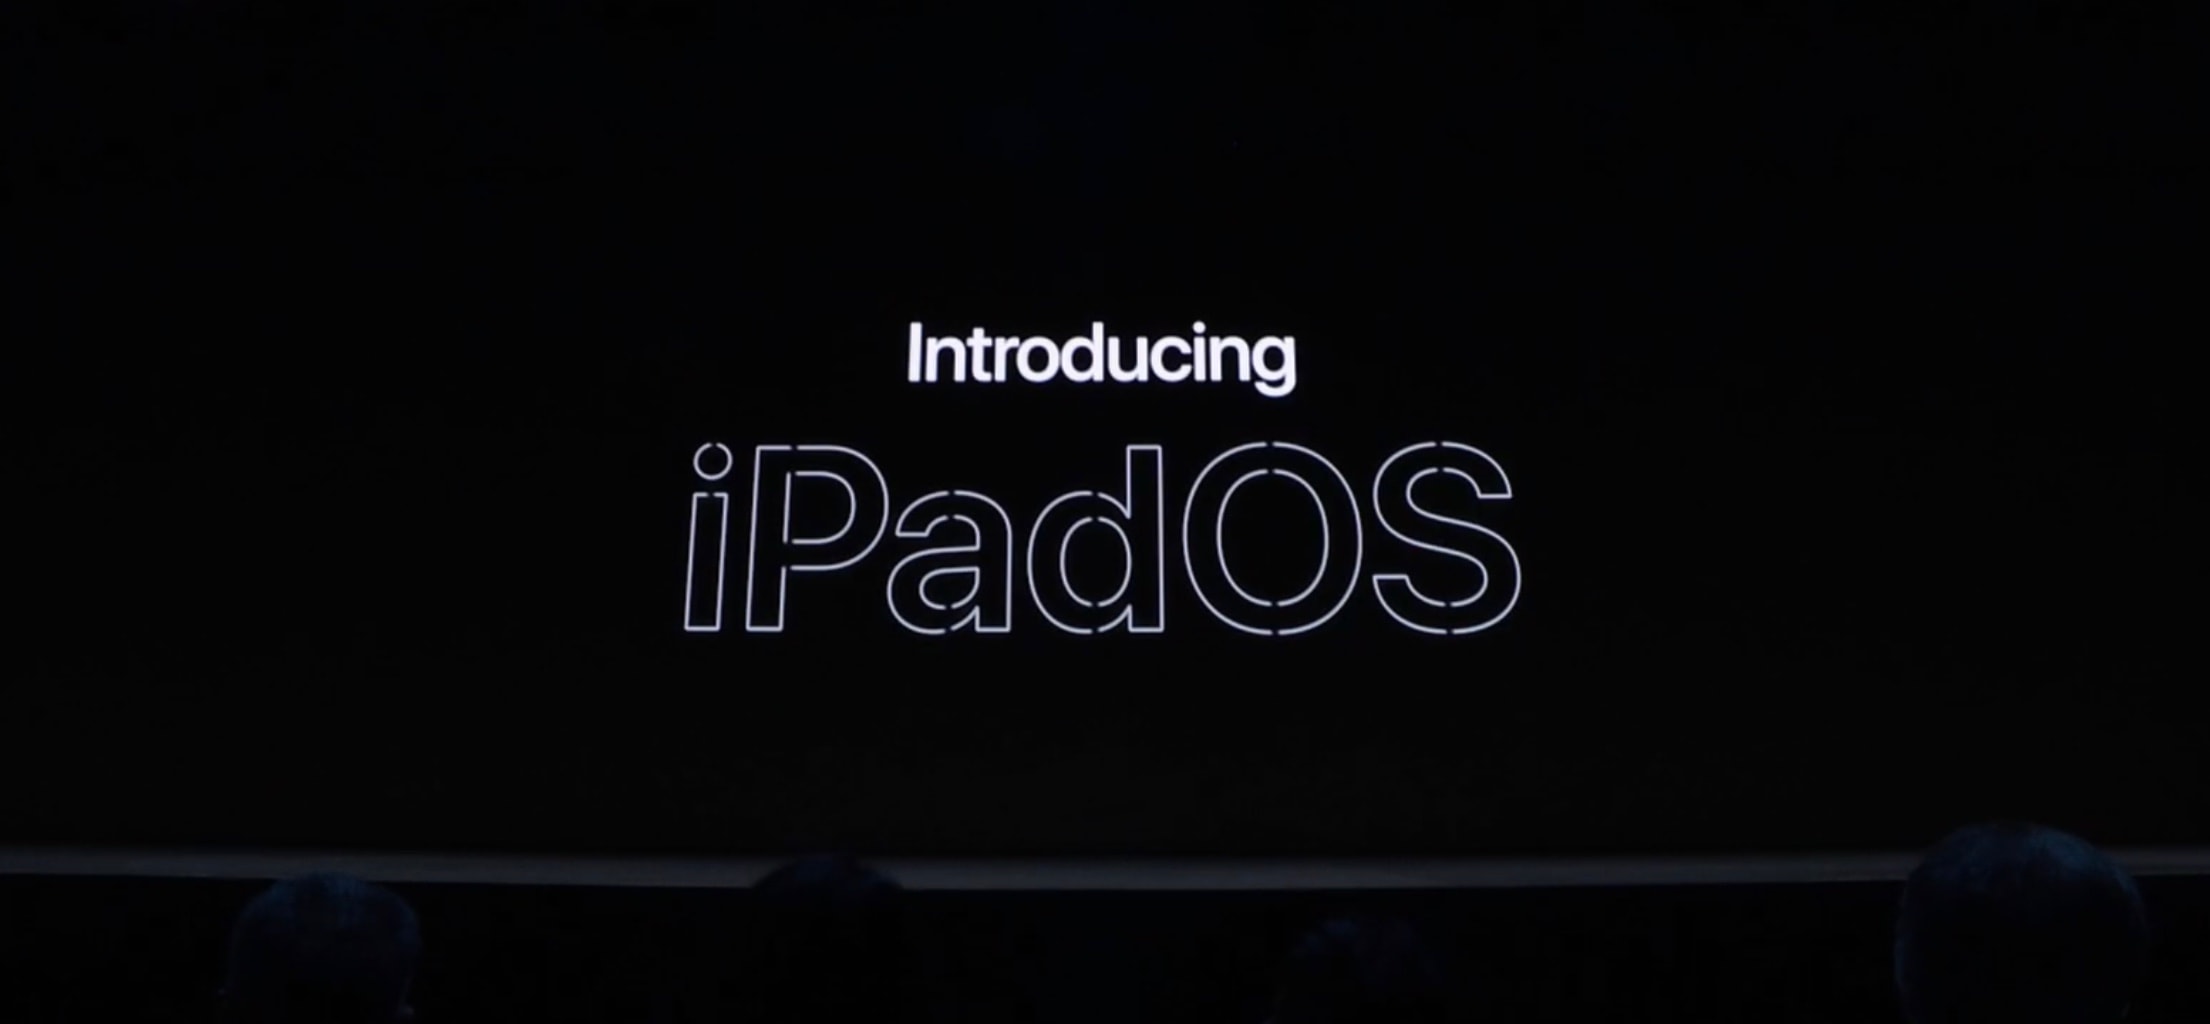 iPadOS is the new name of the tablet version of iOS.